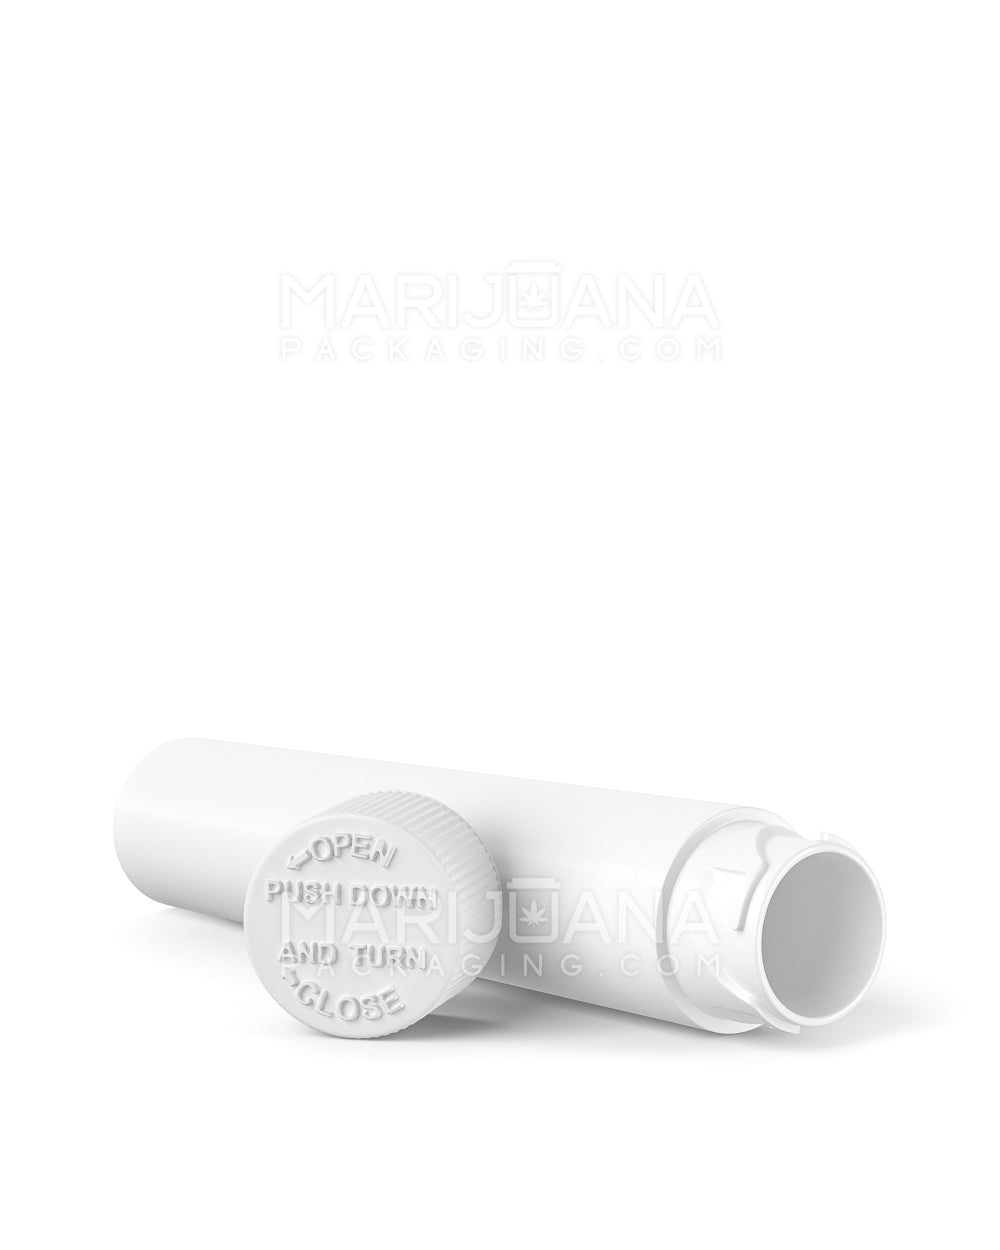 Child Resistant | Push Down & Turn Vape Cartridge Container | 72mm - White Plastic - 1650 Count - 4